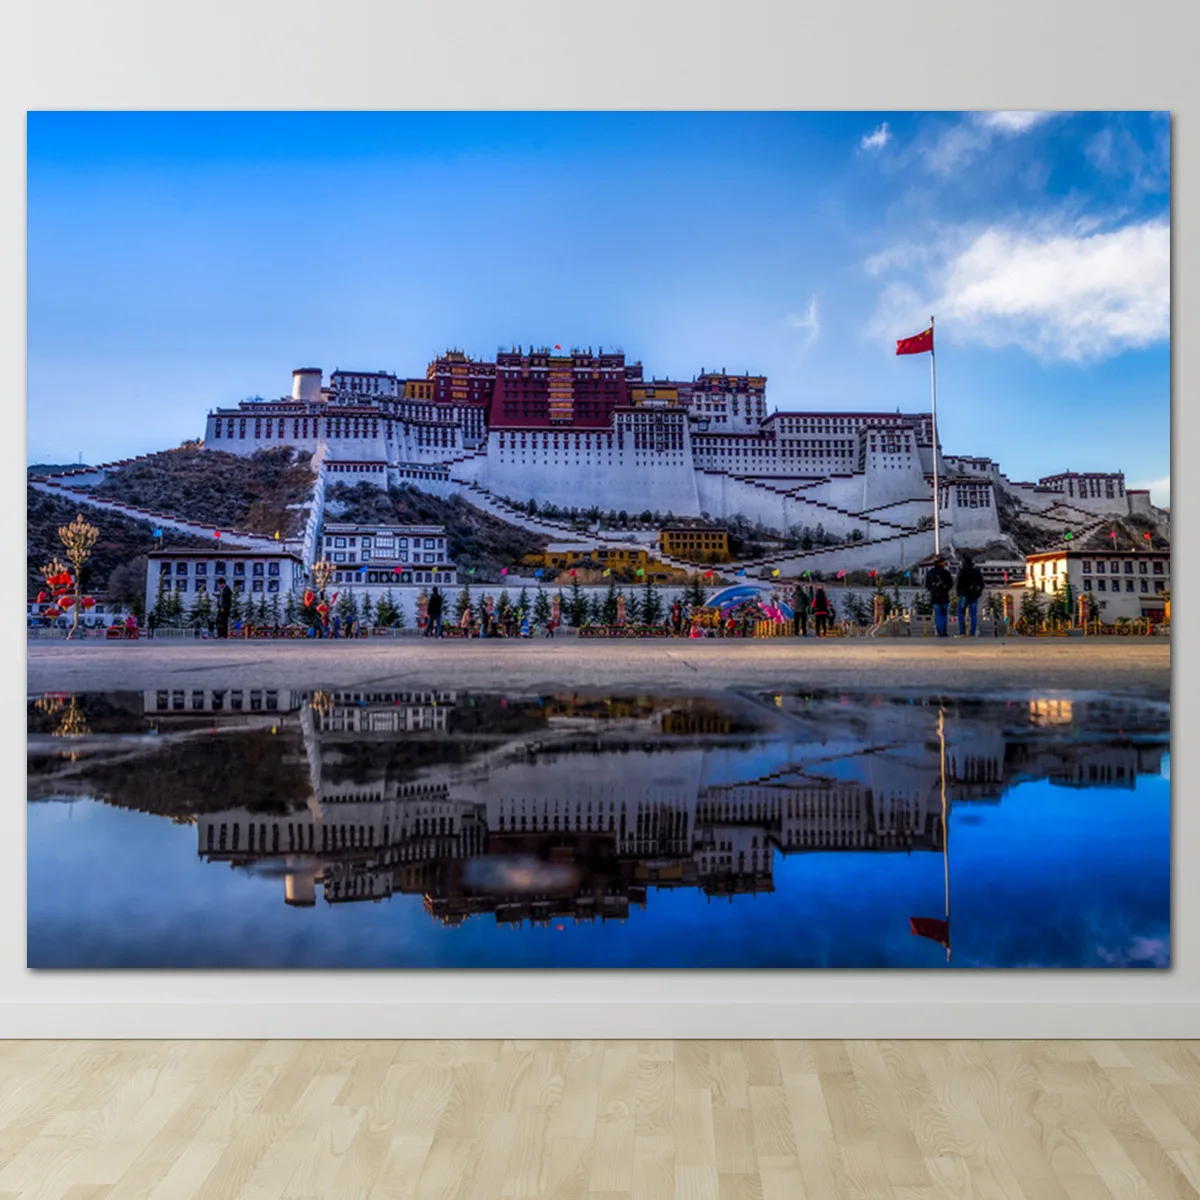 

Tibet Potala Palace Background Cloth Tibetan Landscape Wall Cloth Tapestry Decoration Living Room Bedroom Wall Cloth